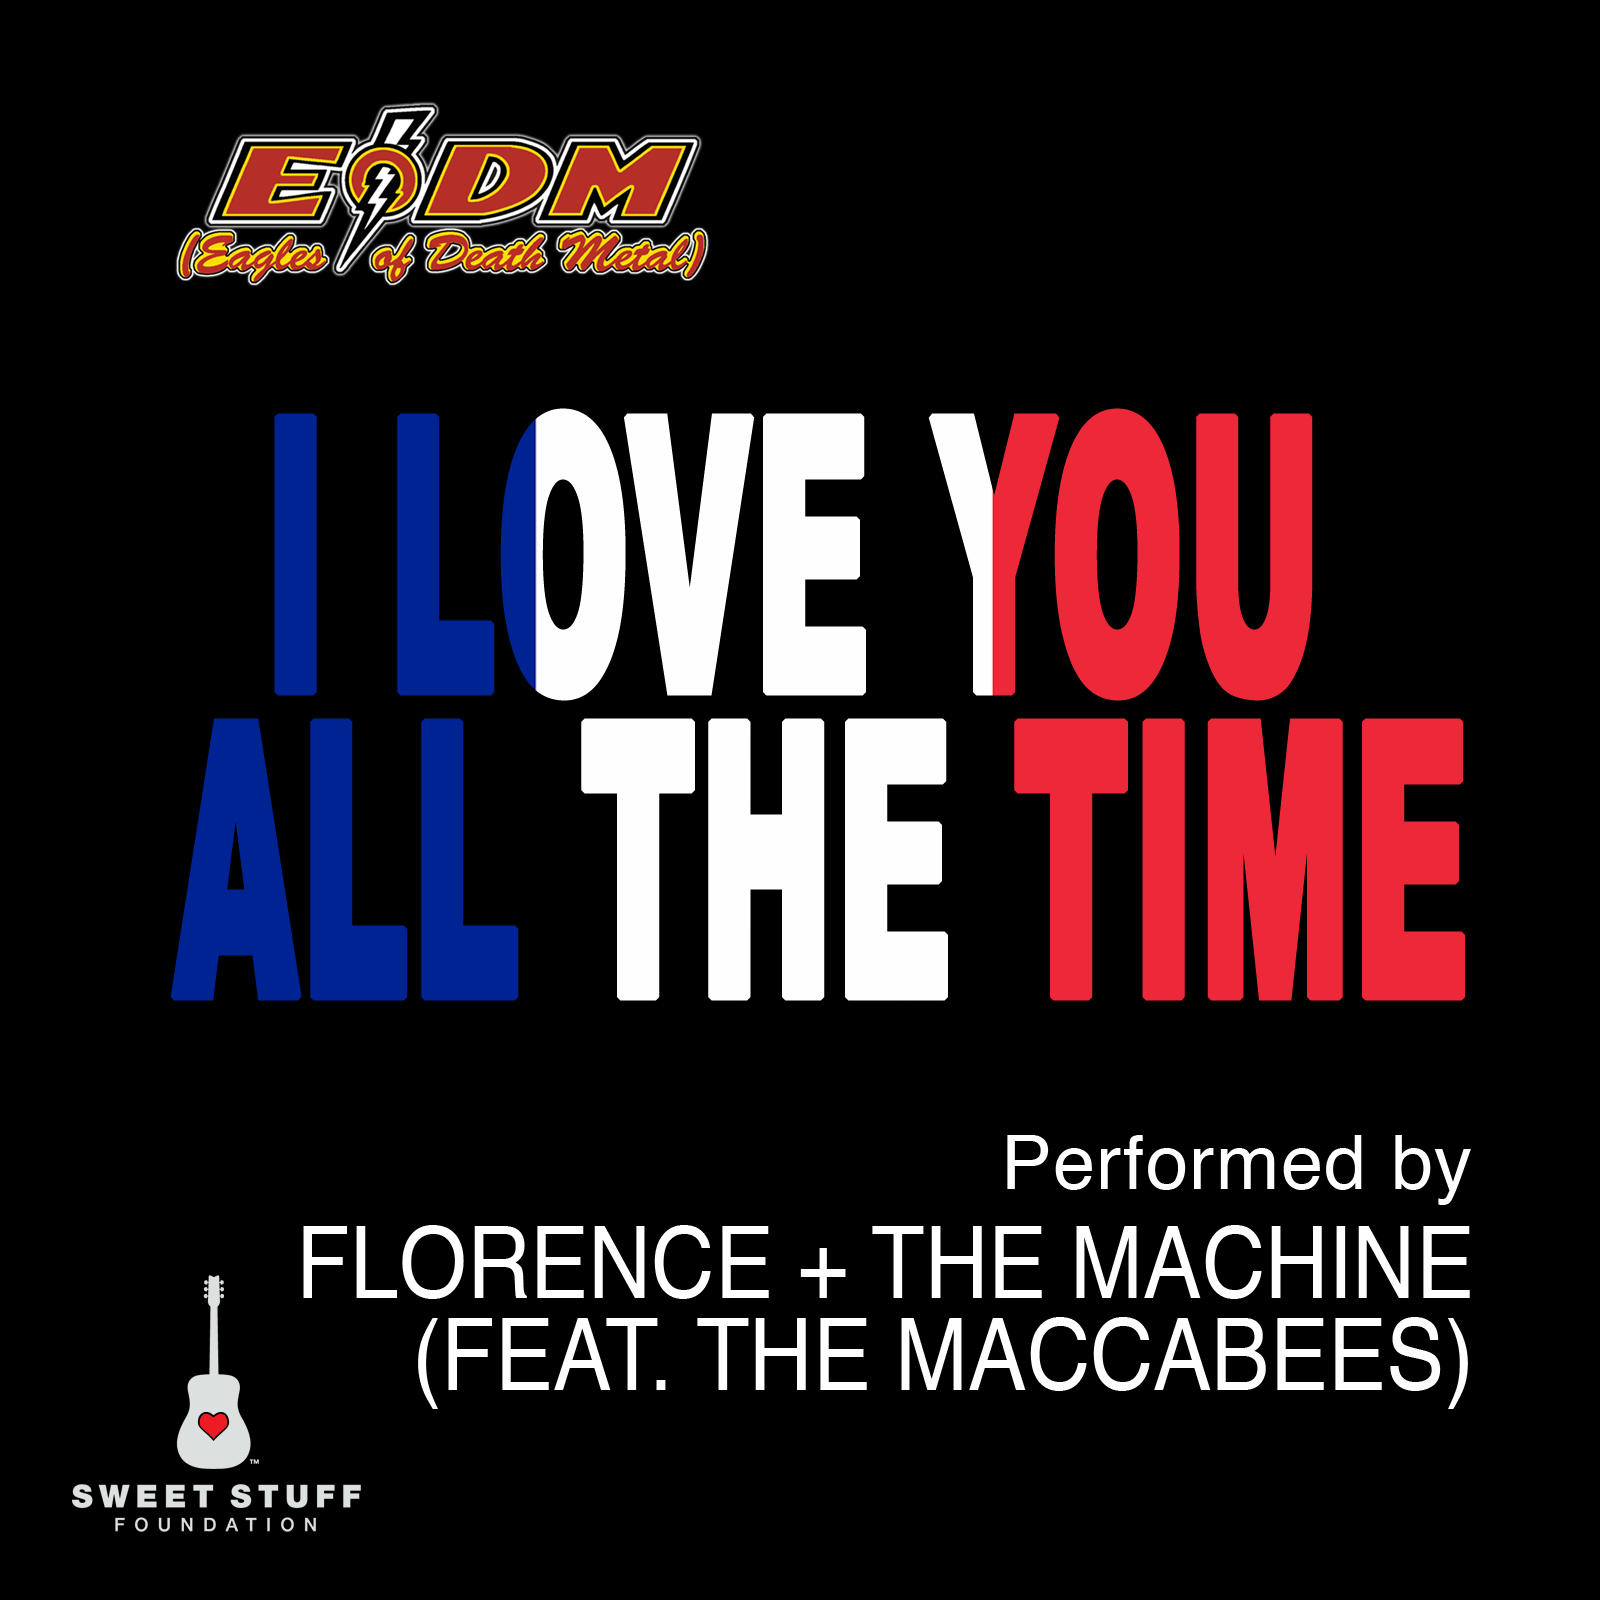 LoveYou_Florence+TheMachine (1)